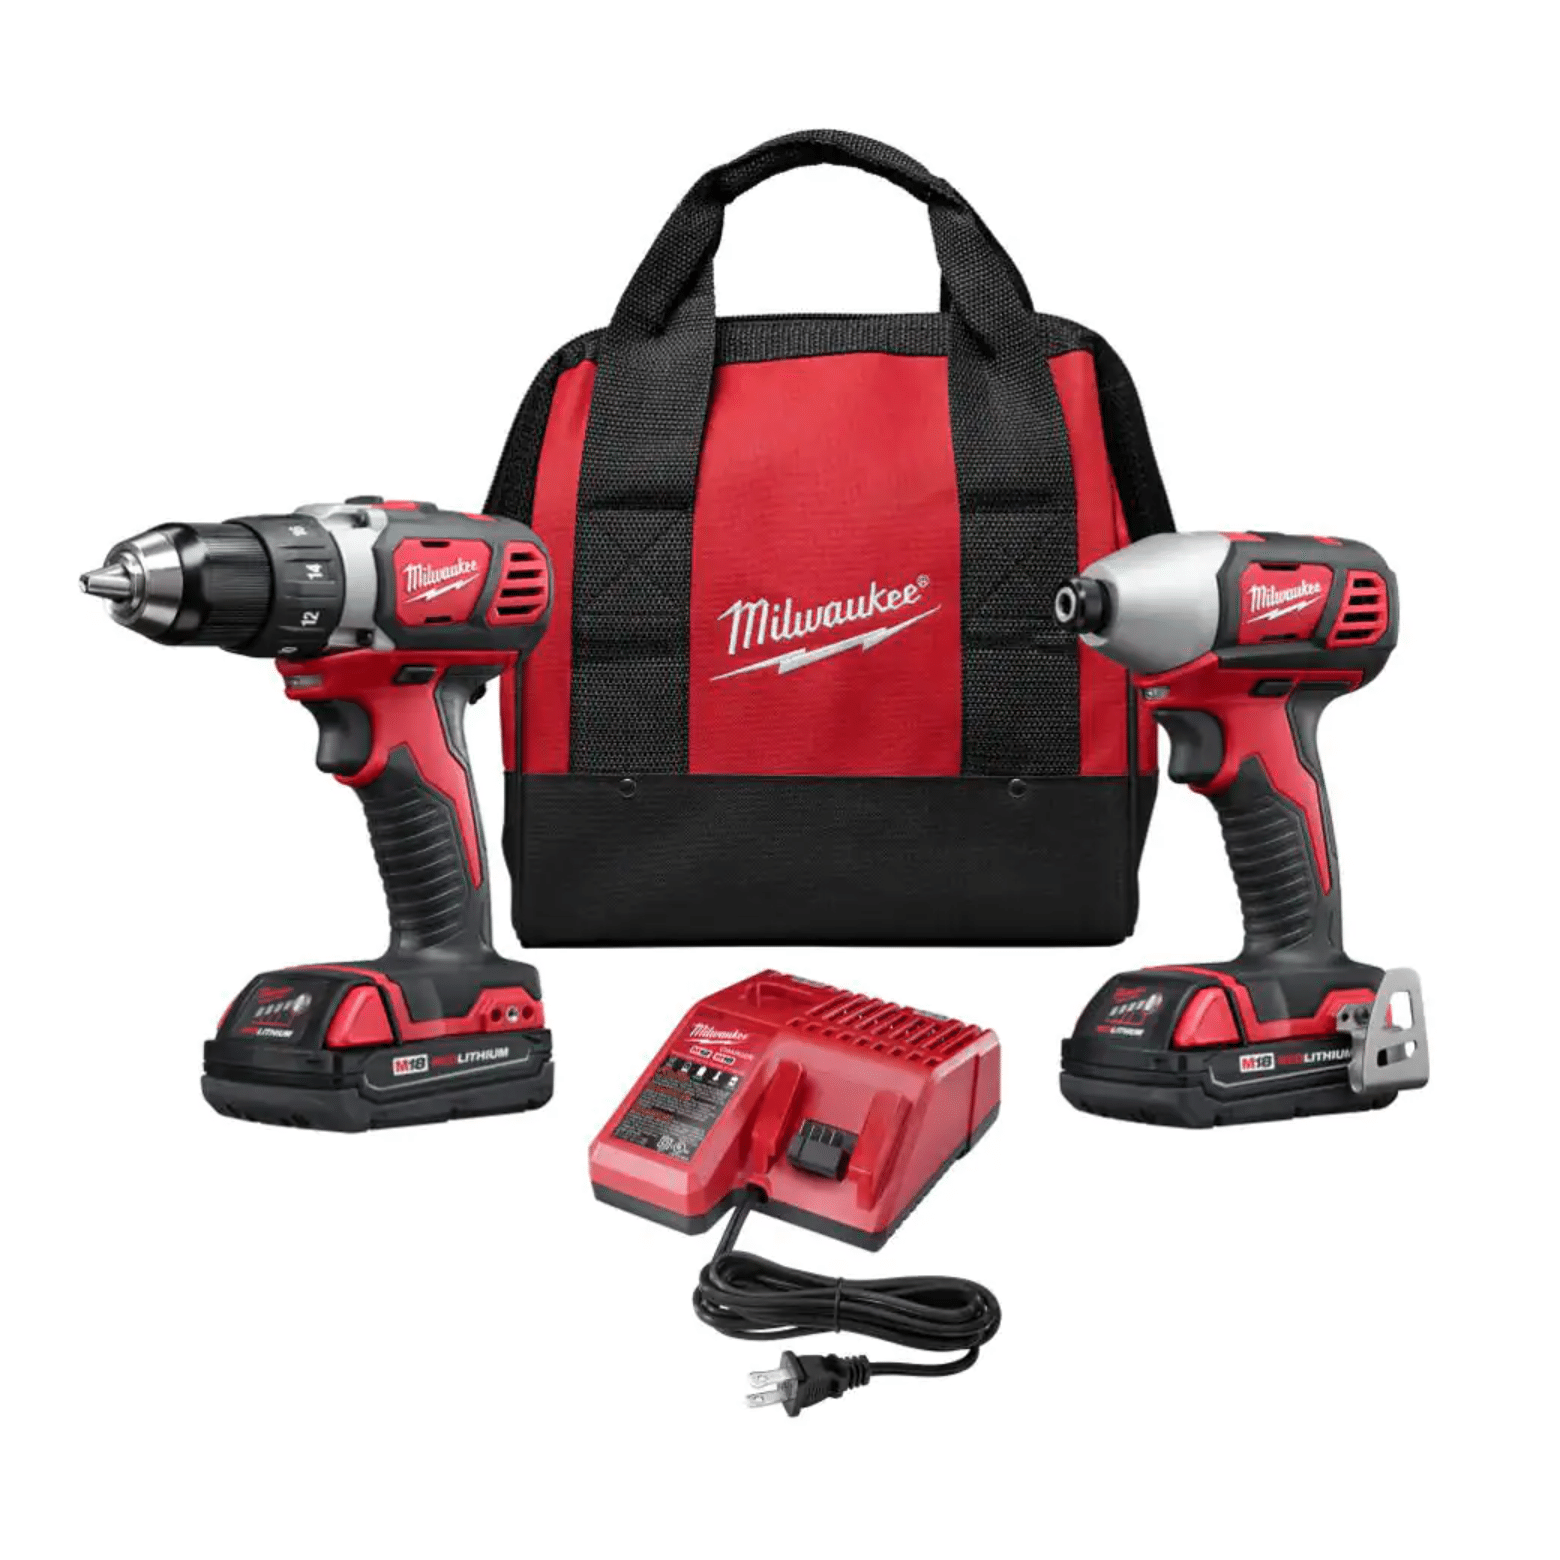 Milwaukee M18 18V Lithium-Ion Cordless Drill Driver/Impact Driver Combo Kit (2-Tool) w/ 2x1.5Ah Batteries, Charger Tool Bag (2691-22)